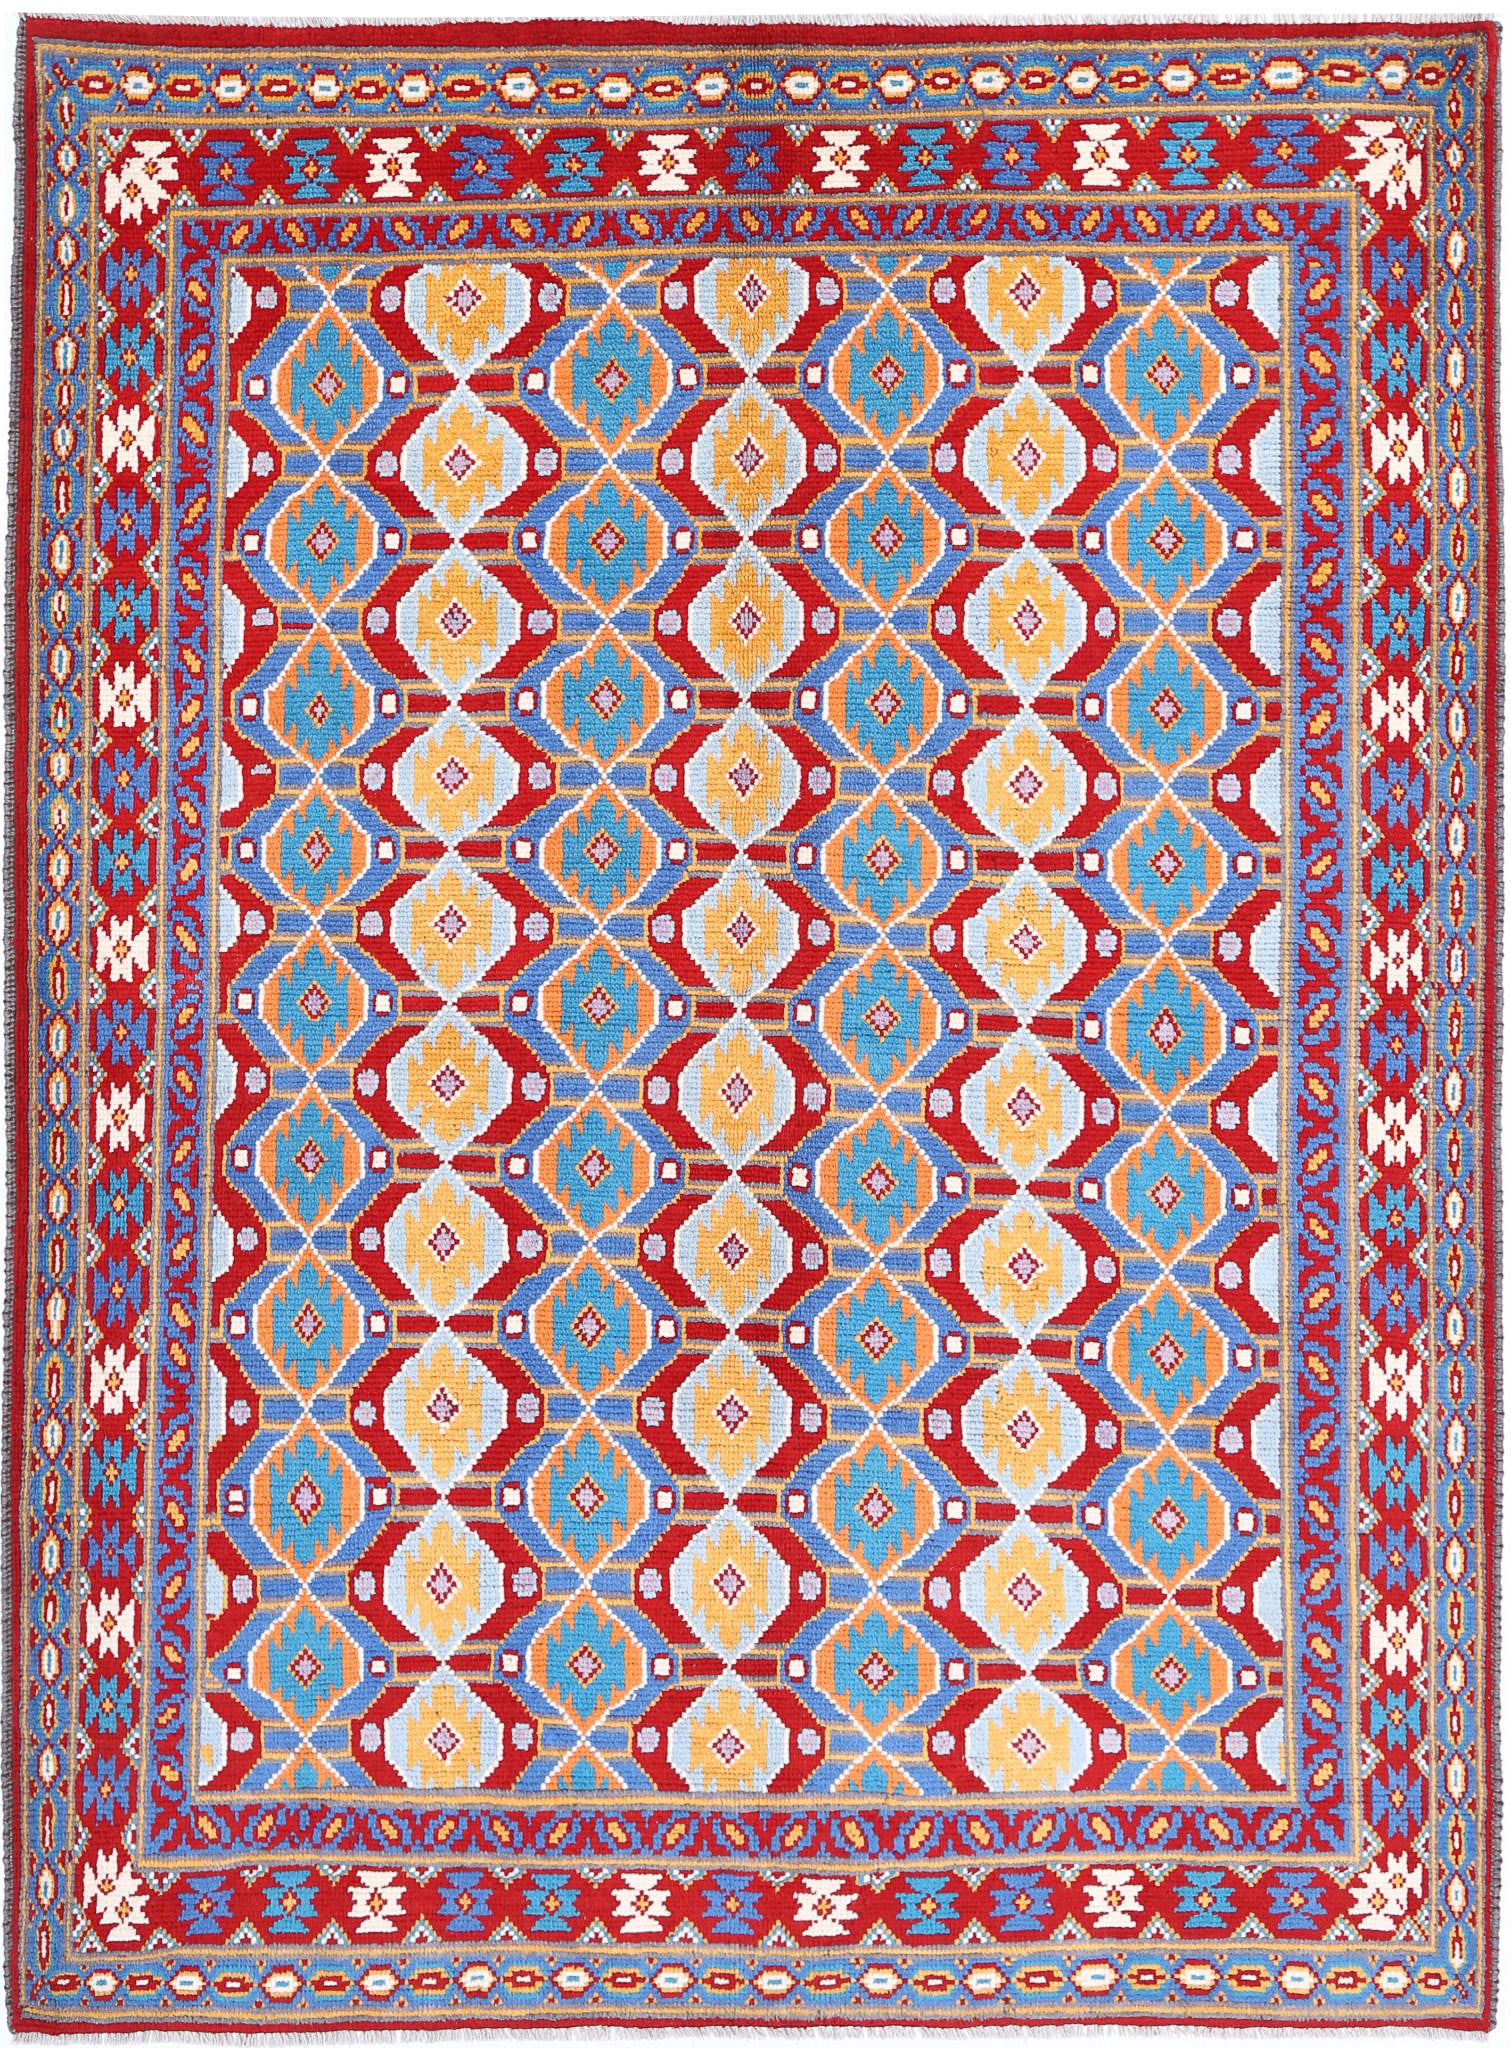 Revival-hand-knotted-qarghani-wool-rug-5014075.jpg